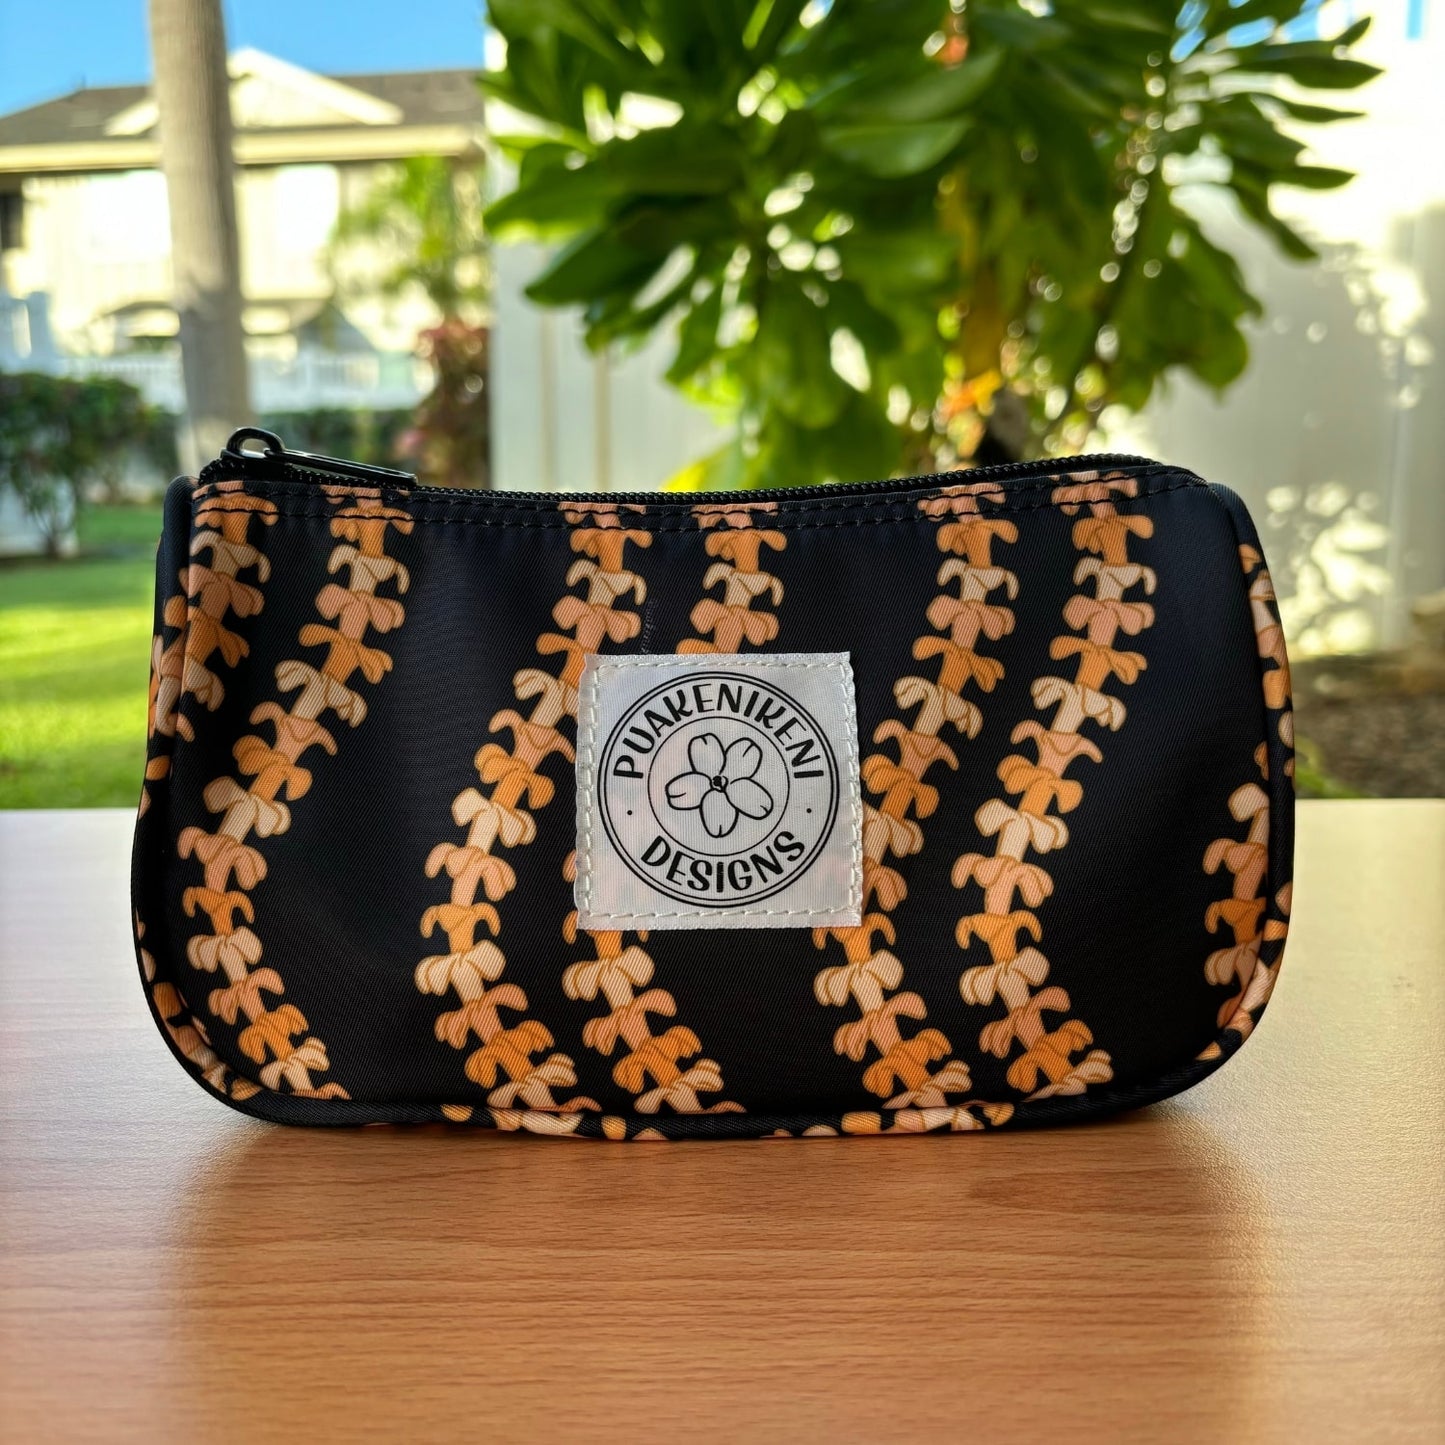 grab and go set includes mini zipper pouch and wristlet key fob in kaulua black orange lei - from Puakenikeni Designs - front view of mini zipper pouch